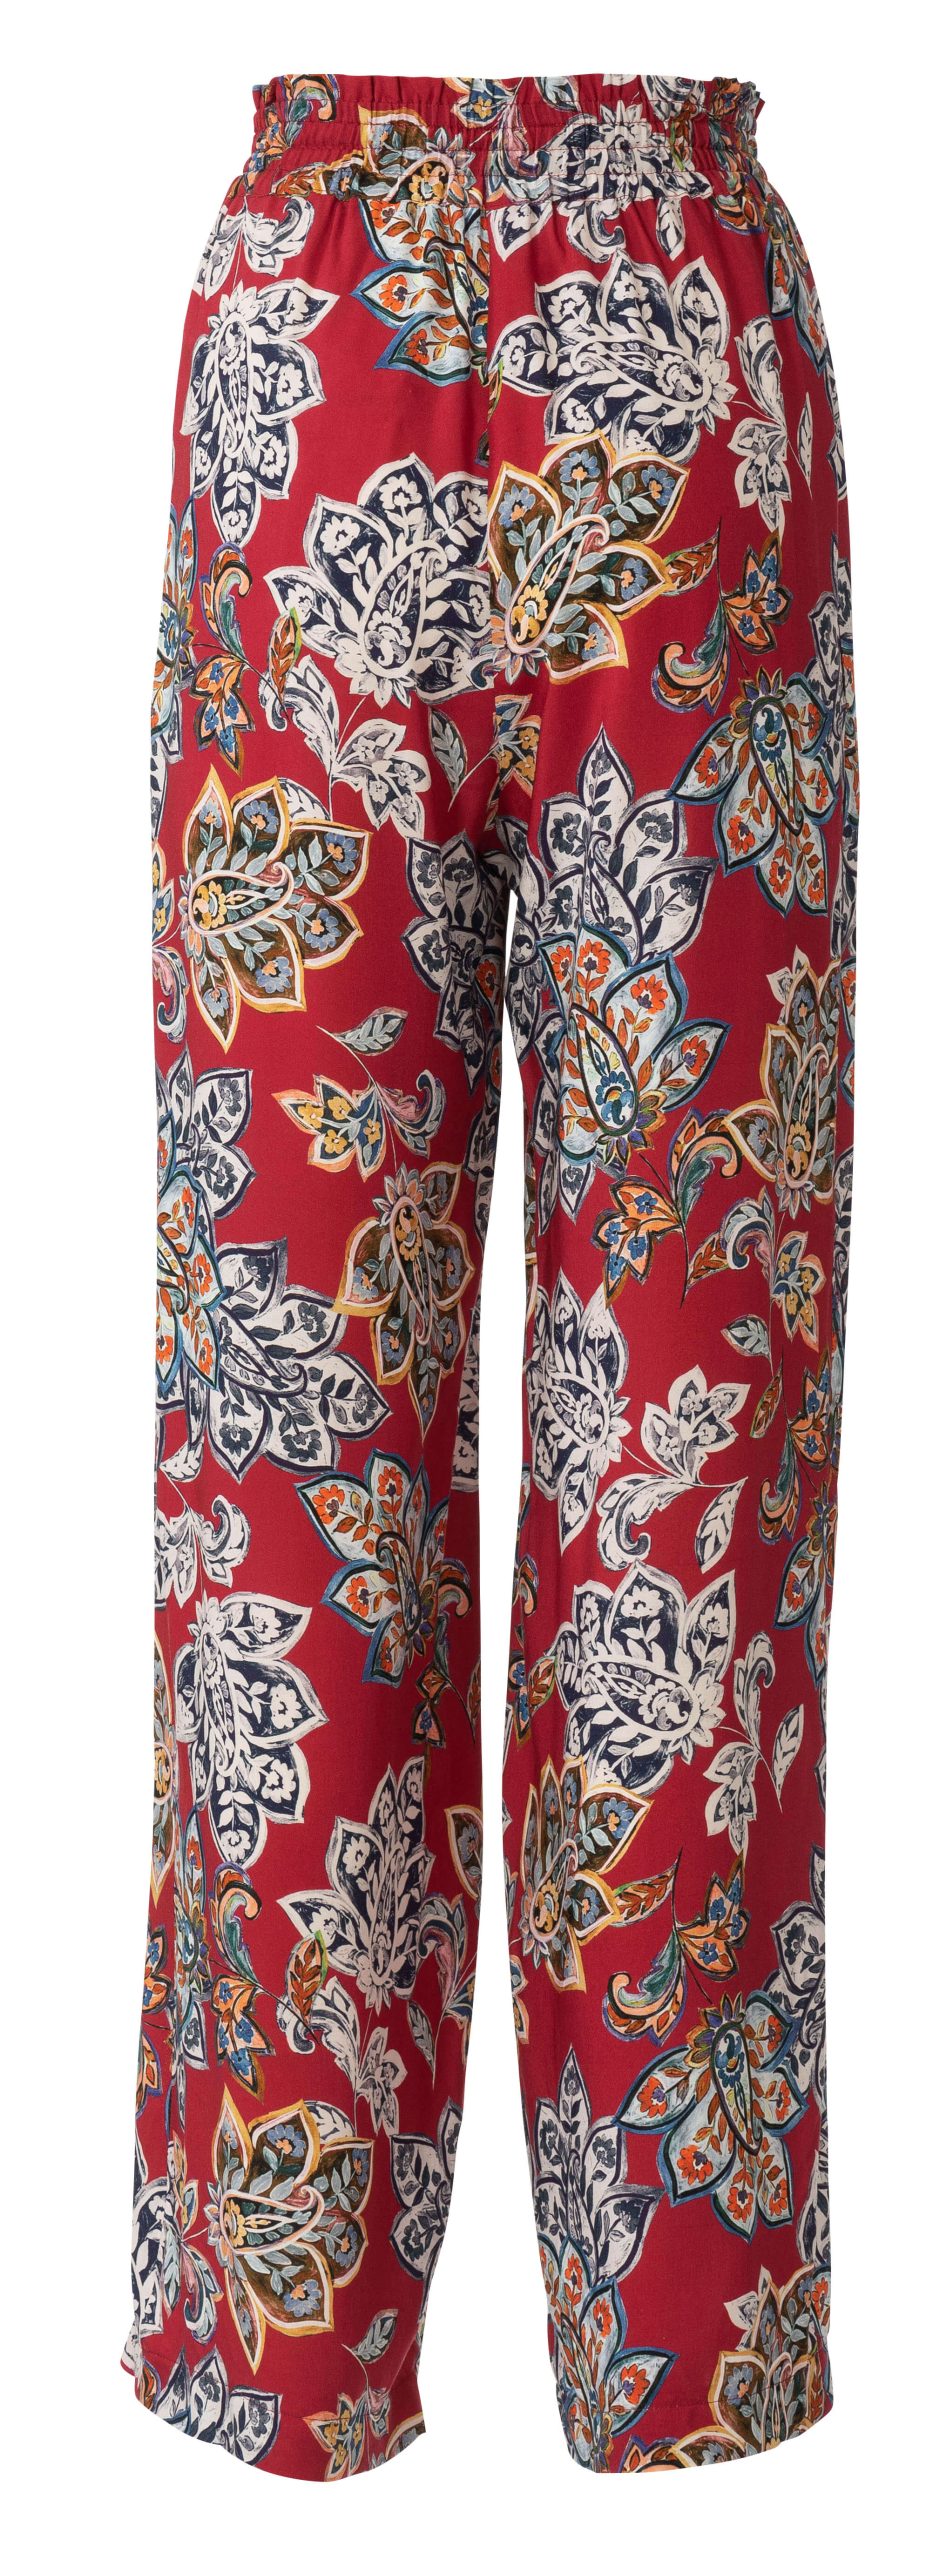 Burda Style Pattern 6229 Misses' Pull-On Pants In Two Lengths